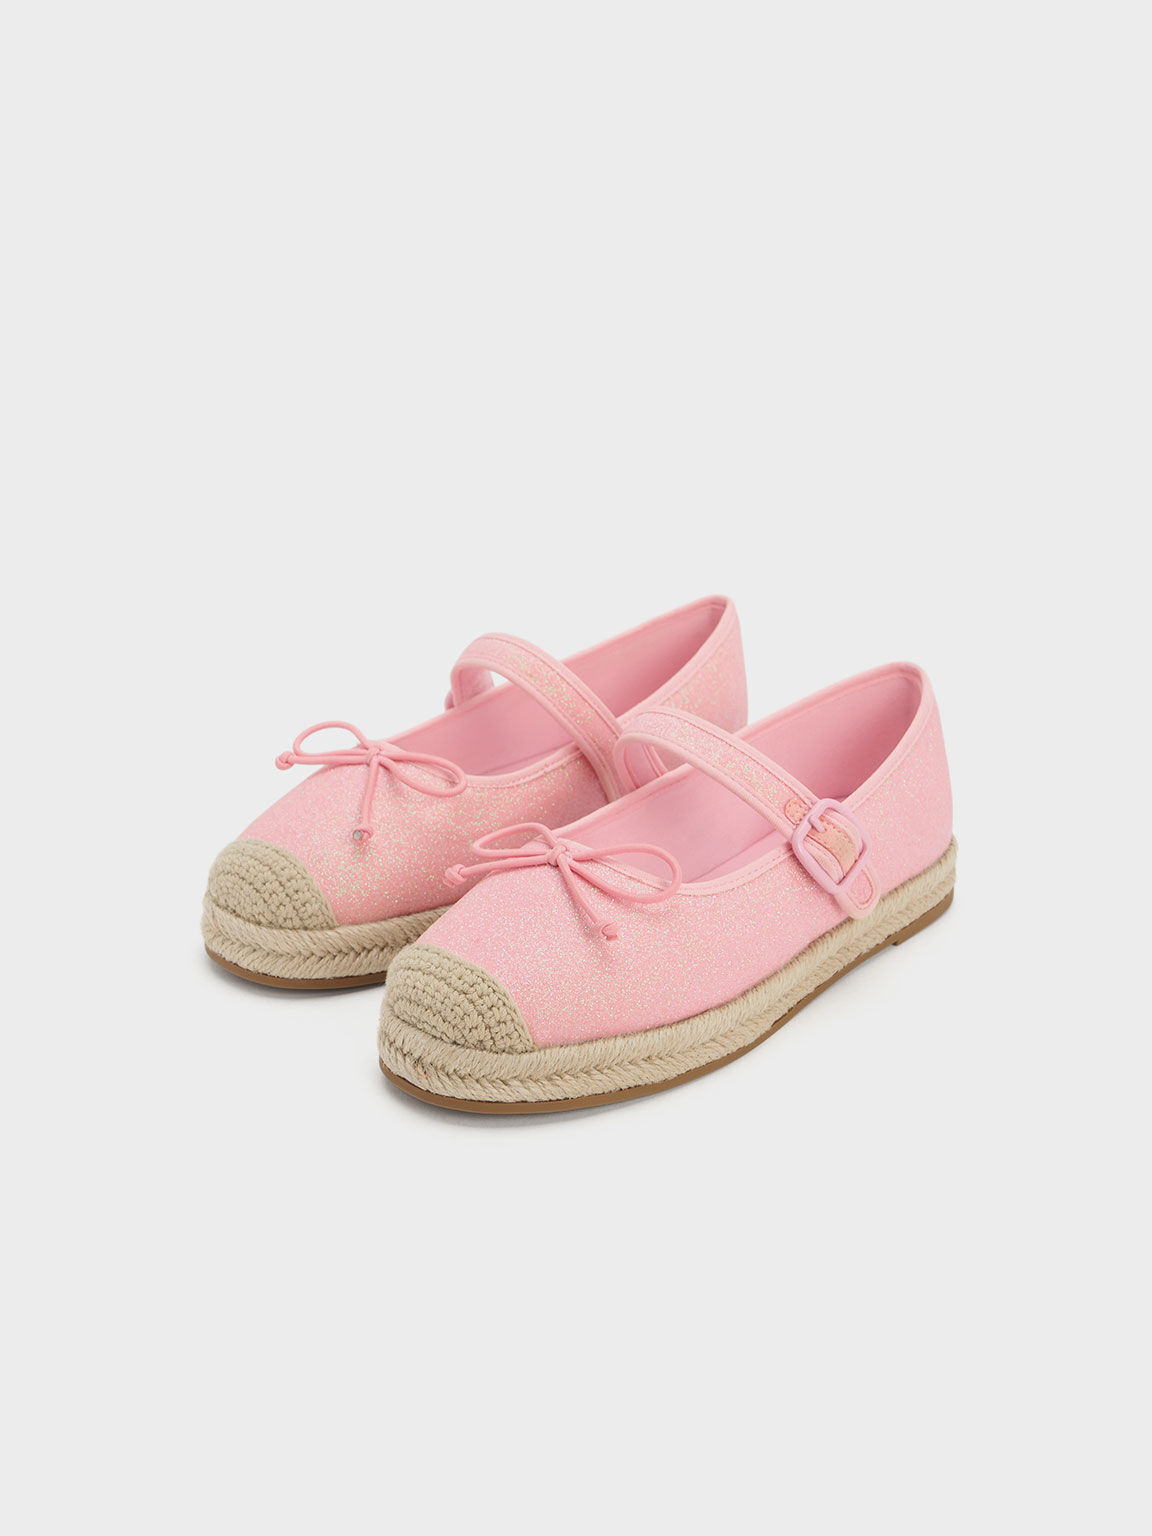 Light Pink Girls' Glittered Bow Espadrilles - CHARLES & KEITH AU